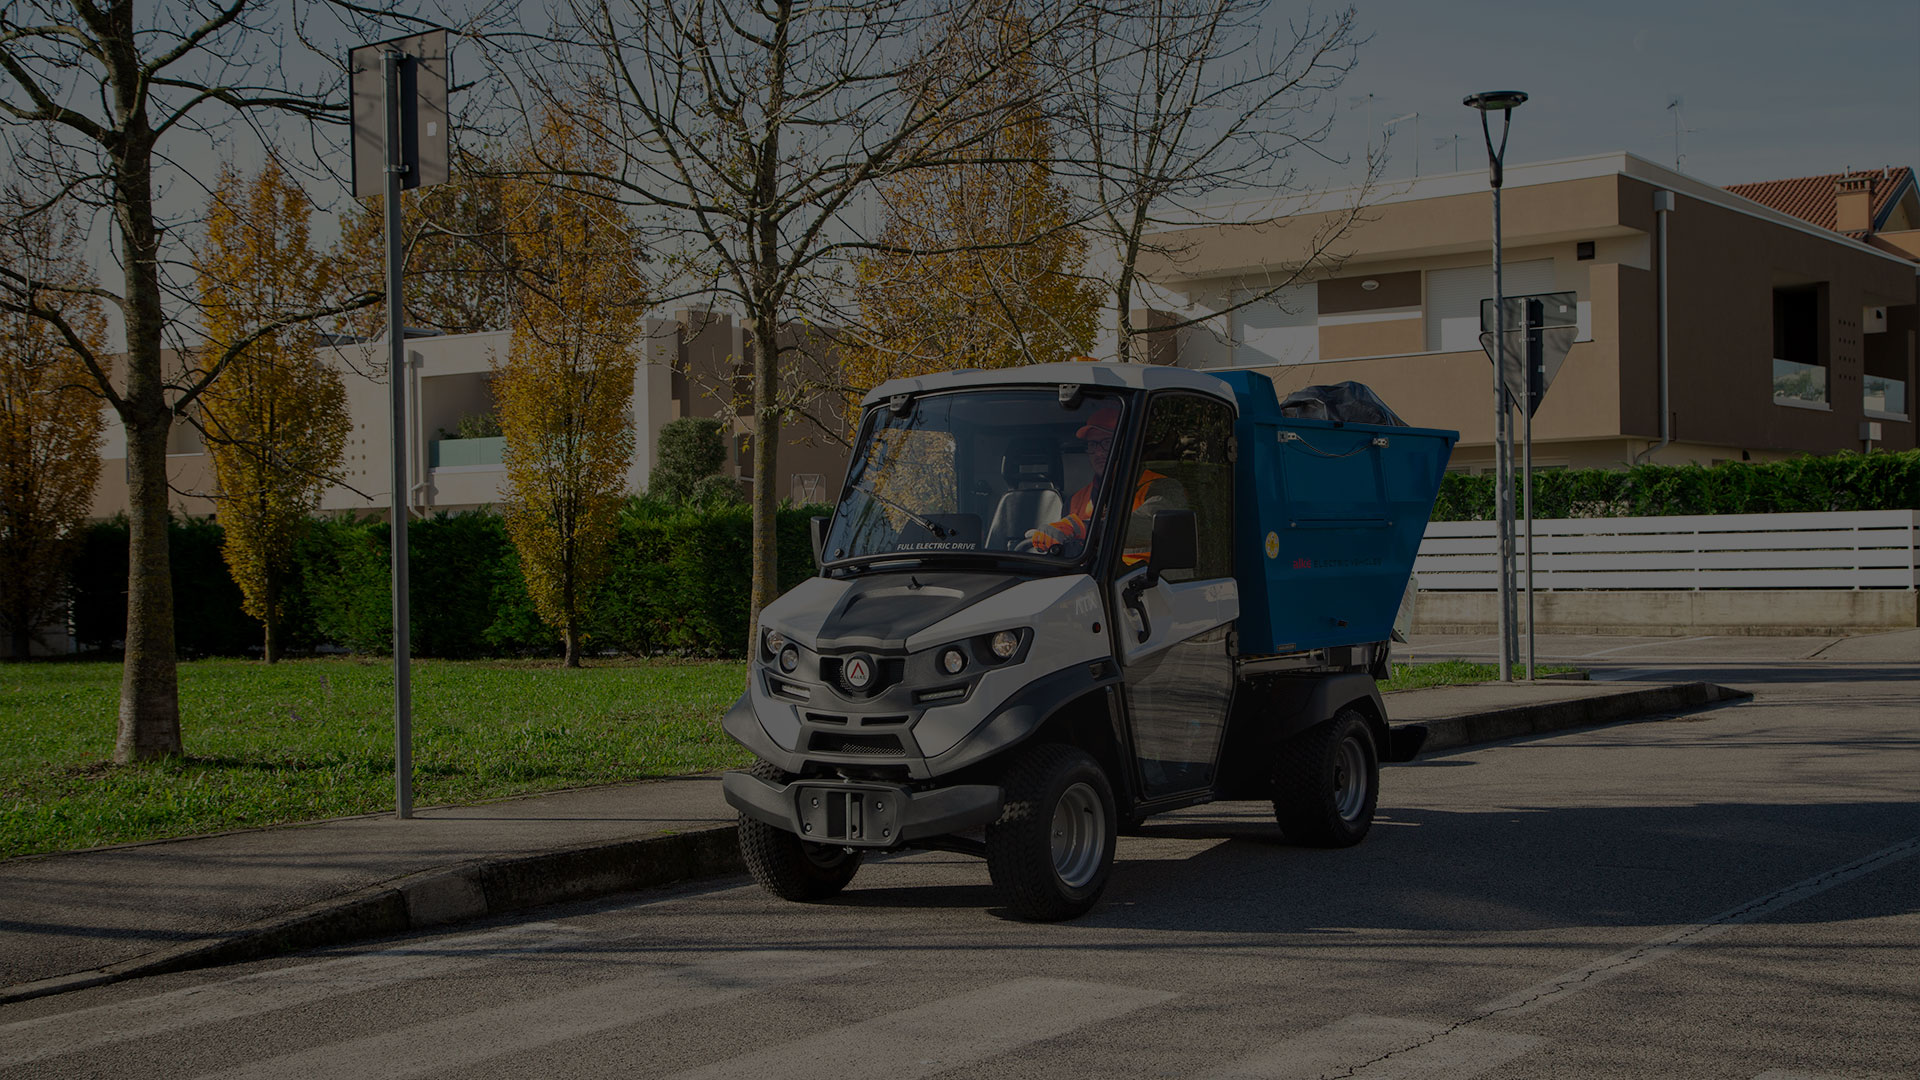 Electric vehicle carrying waste